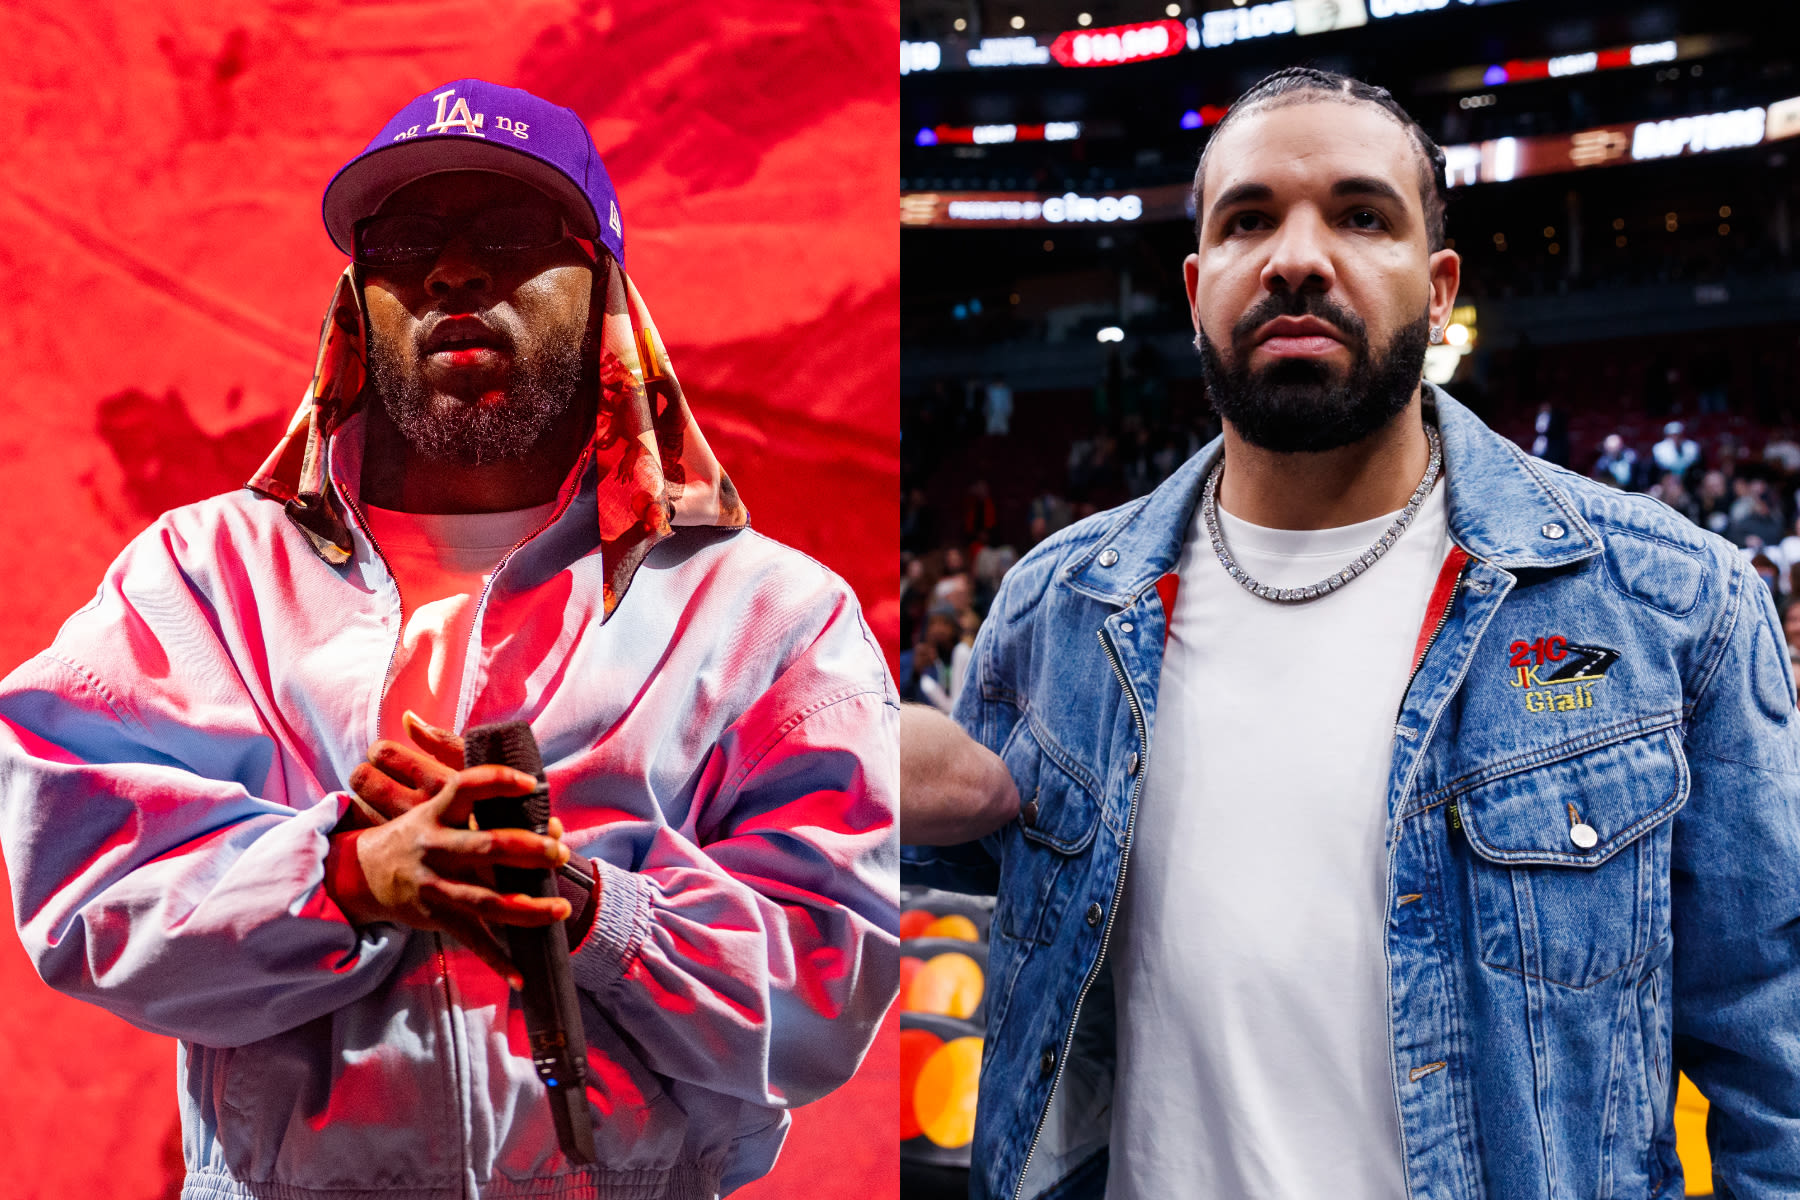 The Kendrick Lamar and Drake Beef Has Made It to ‘Jeopardy!’